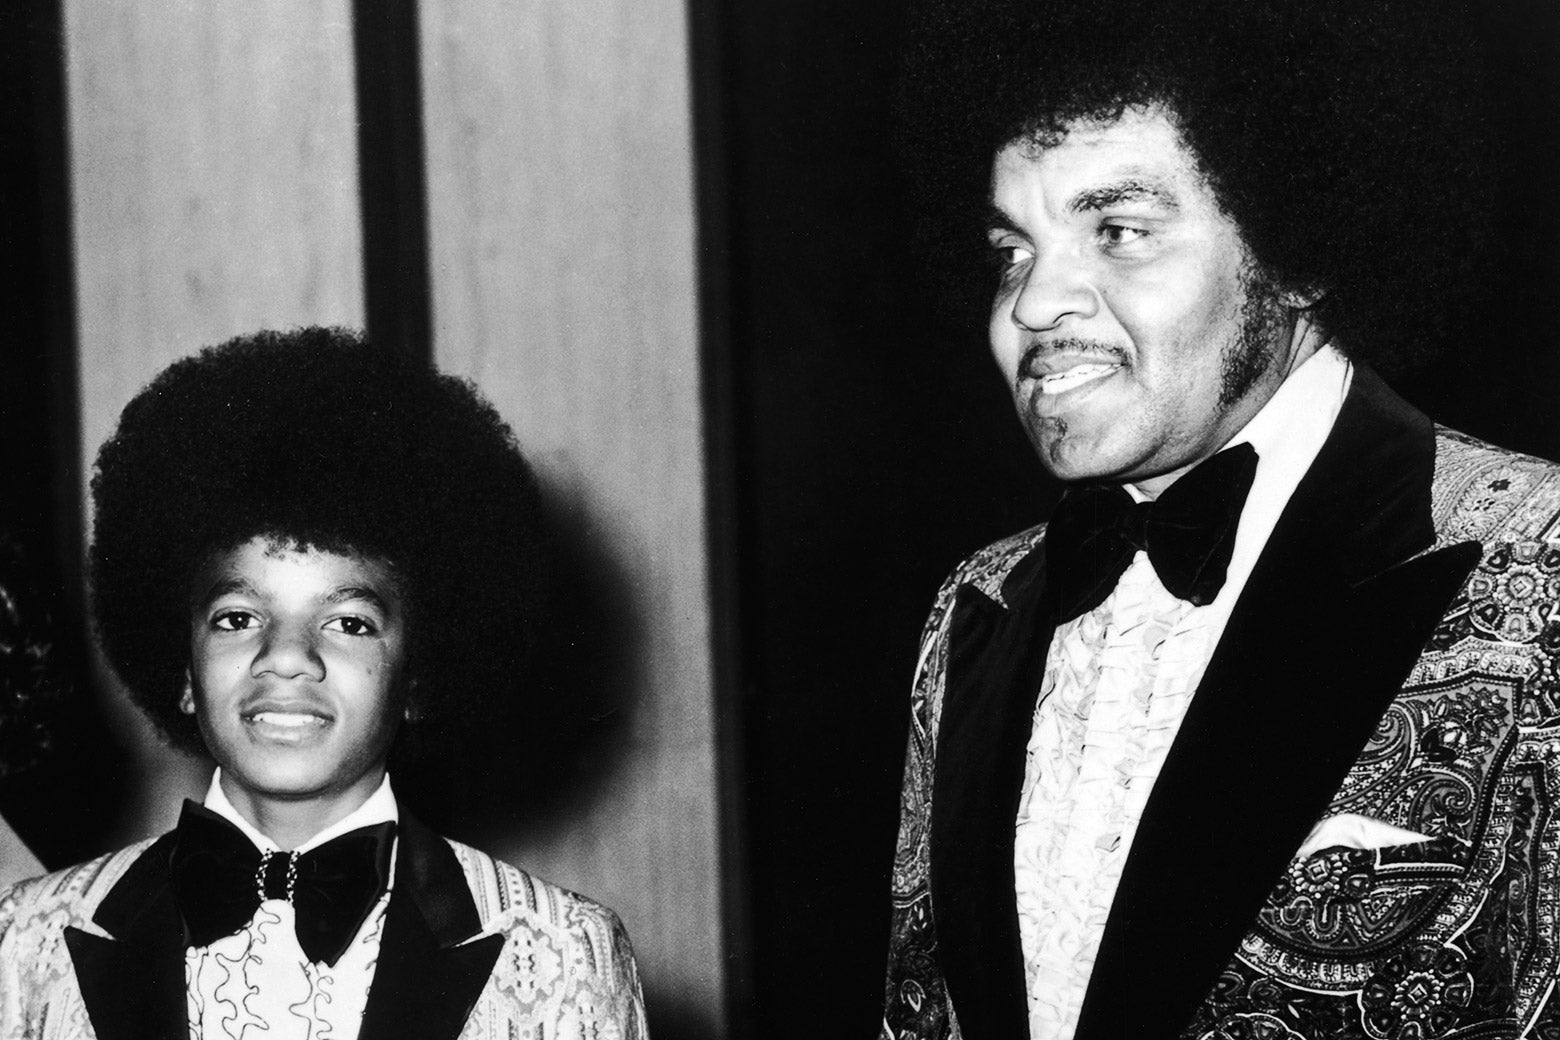 Michael Jackson and his father, Joe Jackson, at the Golden Globes.